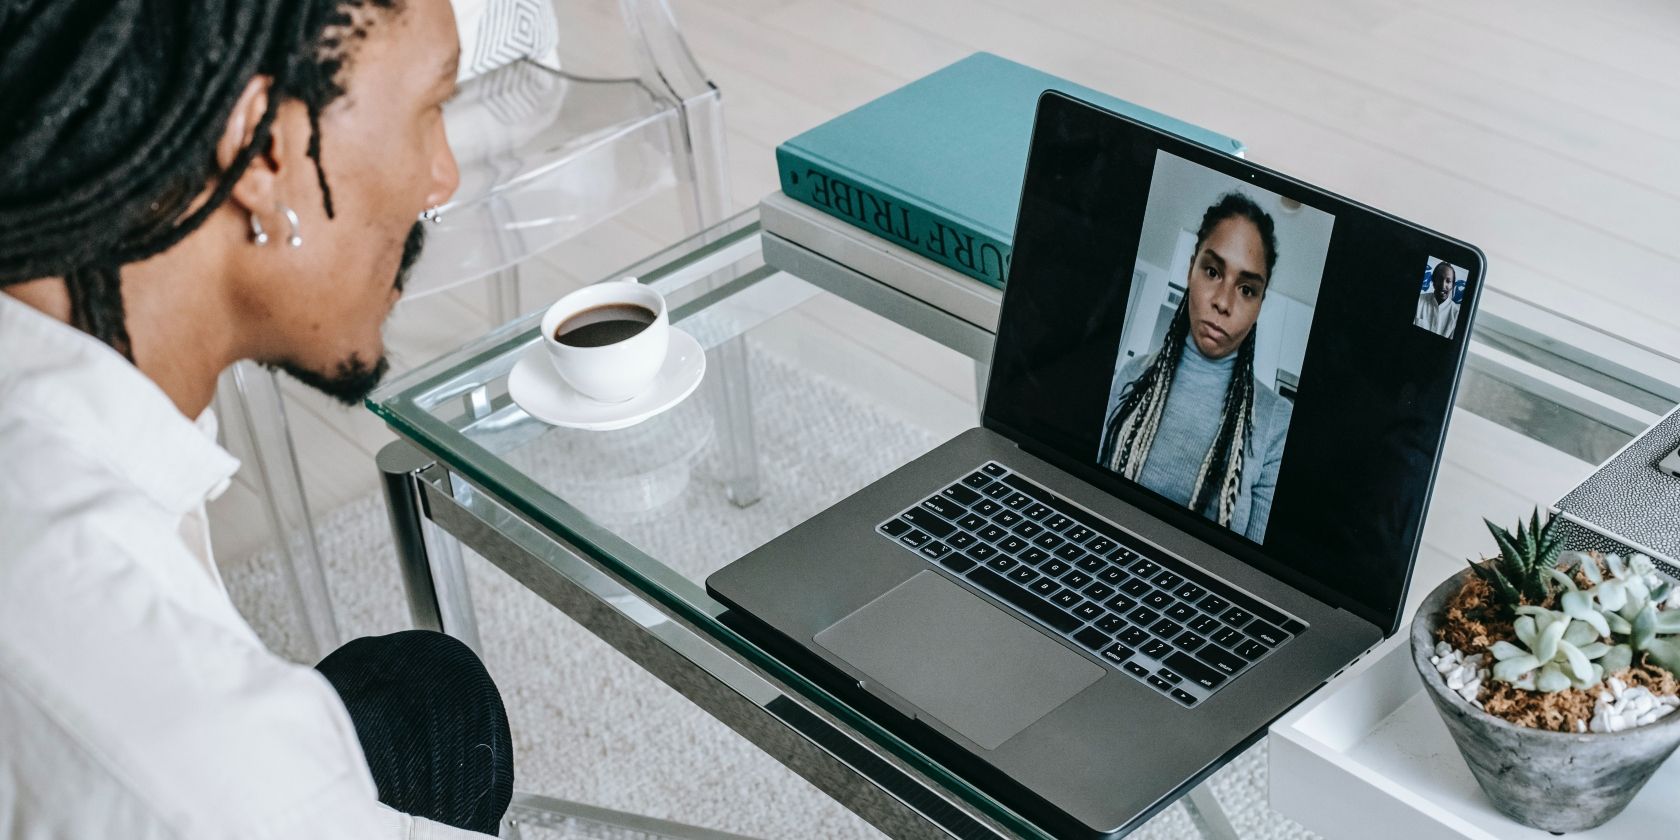 A black guy on a video call with woman